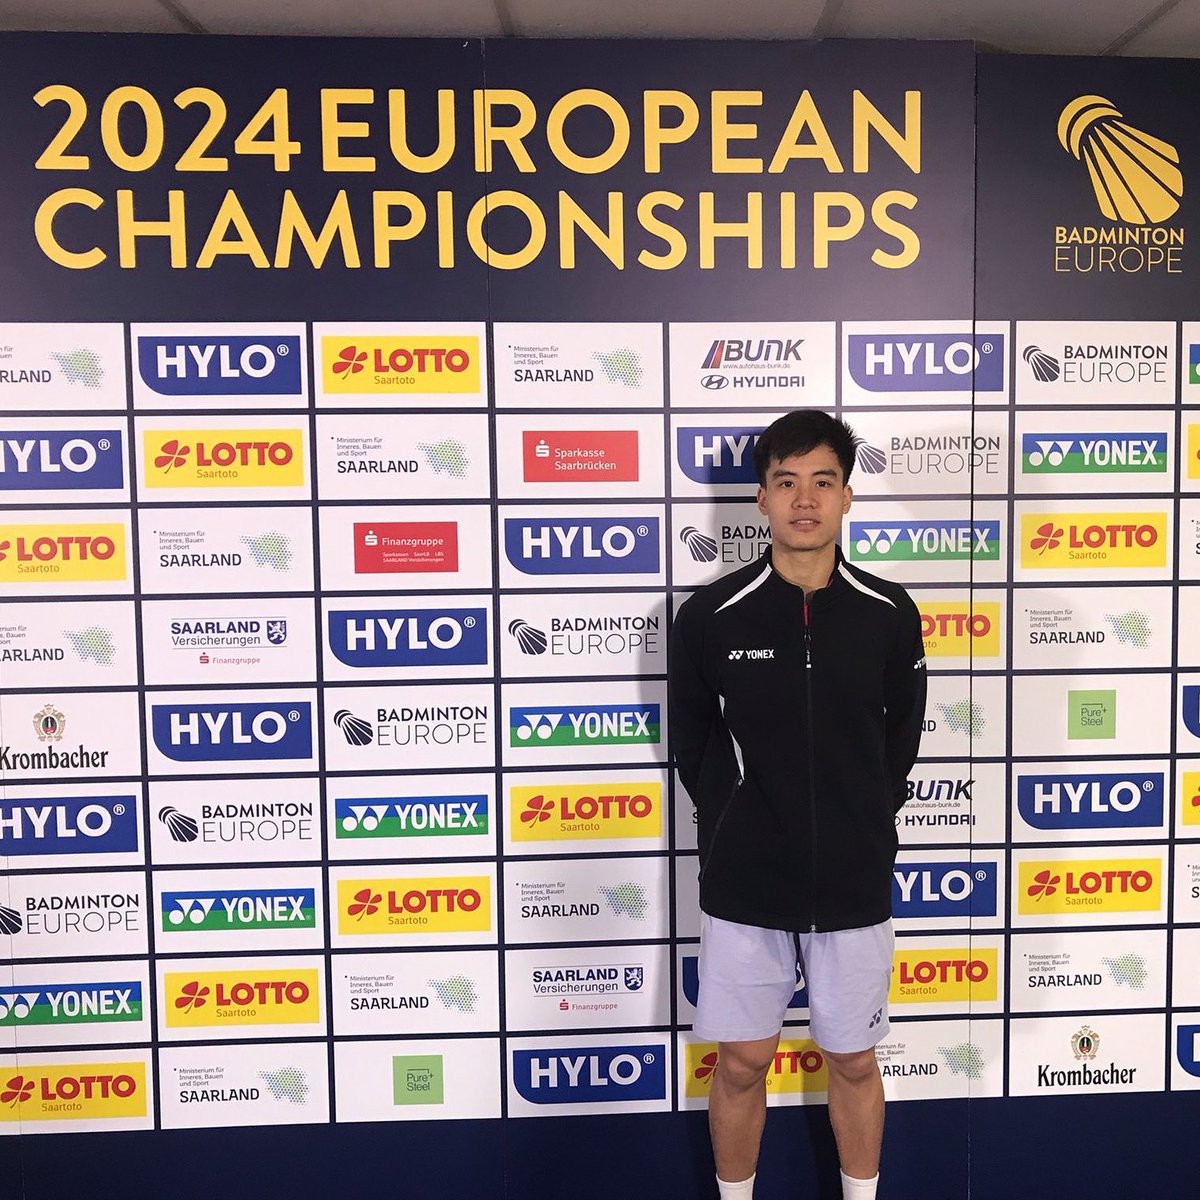 **Nguyen into last 16 of the 2024 European Championships** Nhat Nguyen 🇮🇪 has beaten 2023 European Games medalist Misha Zilberman 🇮🇱 21-16 21-10 to progress to the last 16 of the championships. 💪☘️